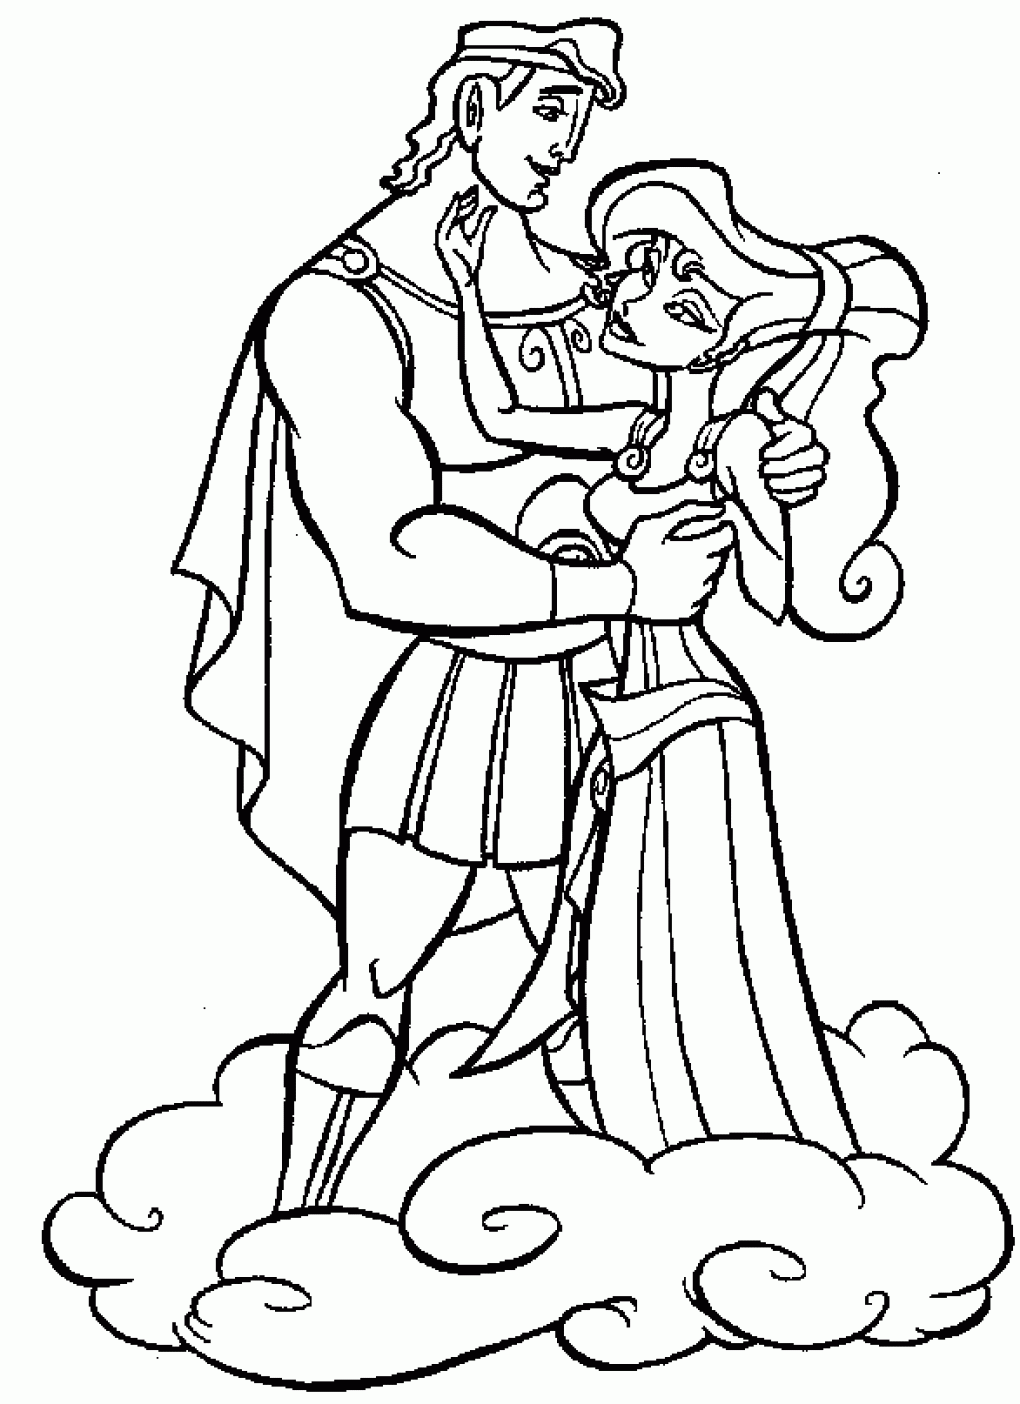 Free Printable Hercules Coloring Pages For Kids Coloring Wallpapers Download Free Images Wallpaper [coloring365.blogspot.com]